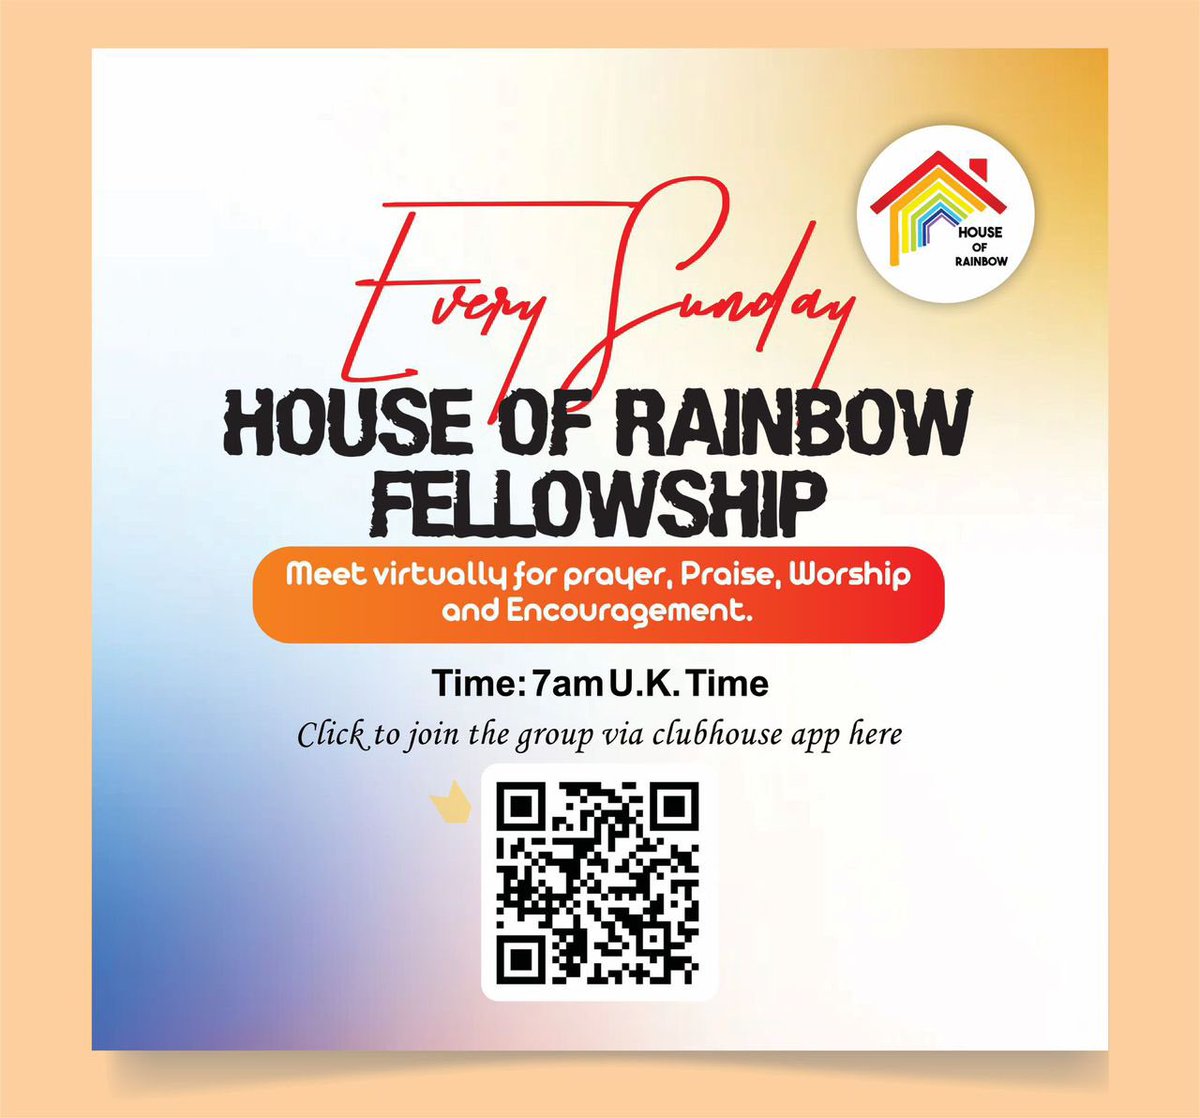 Every Sunday, house of rainbow fellowship meet virtually for prayers, praise, worship and encouragement. 7am U.K. Time Click to join the group here. clubhouse.com/c/join/xbhNsbMs